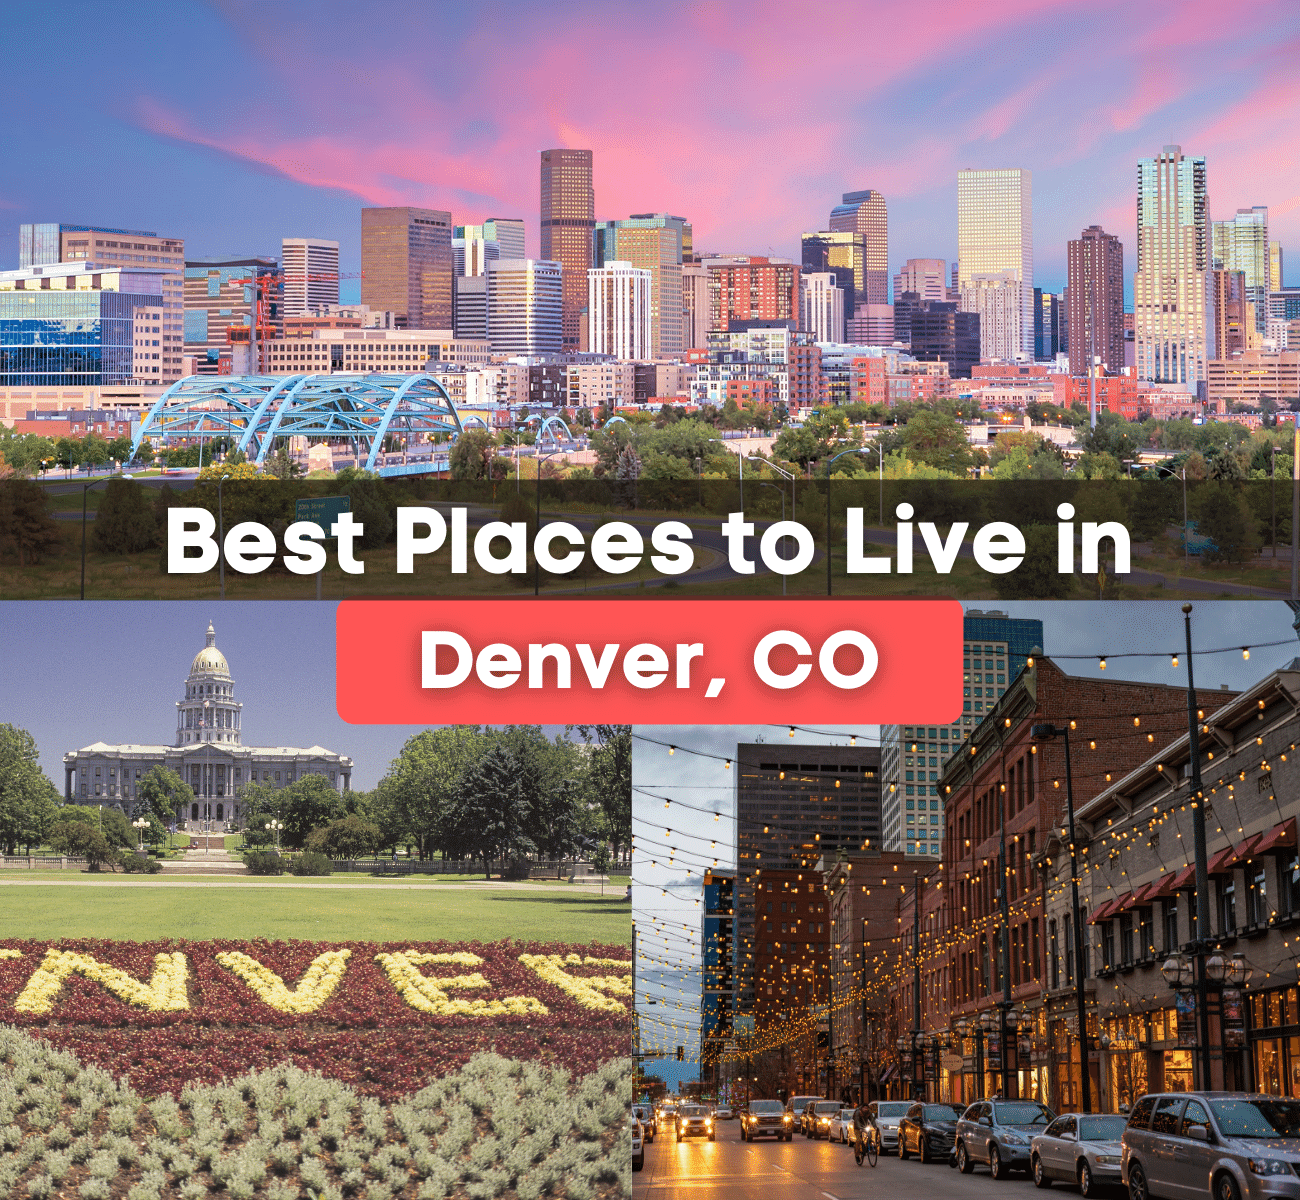 What are the best places to live in Denver? The best neighborhoods in Denver, CO!